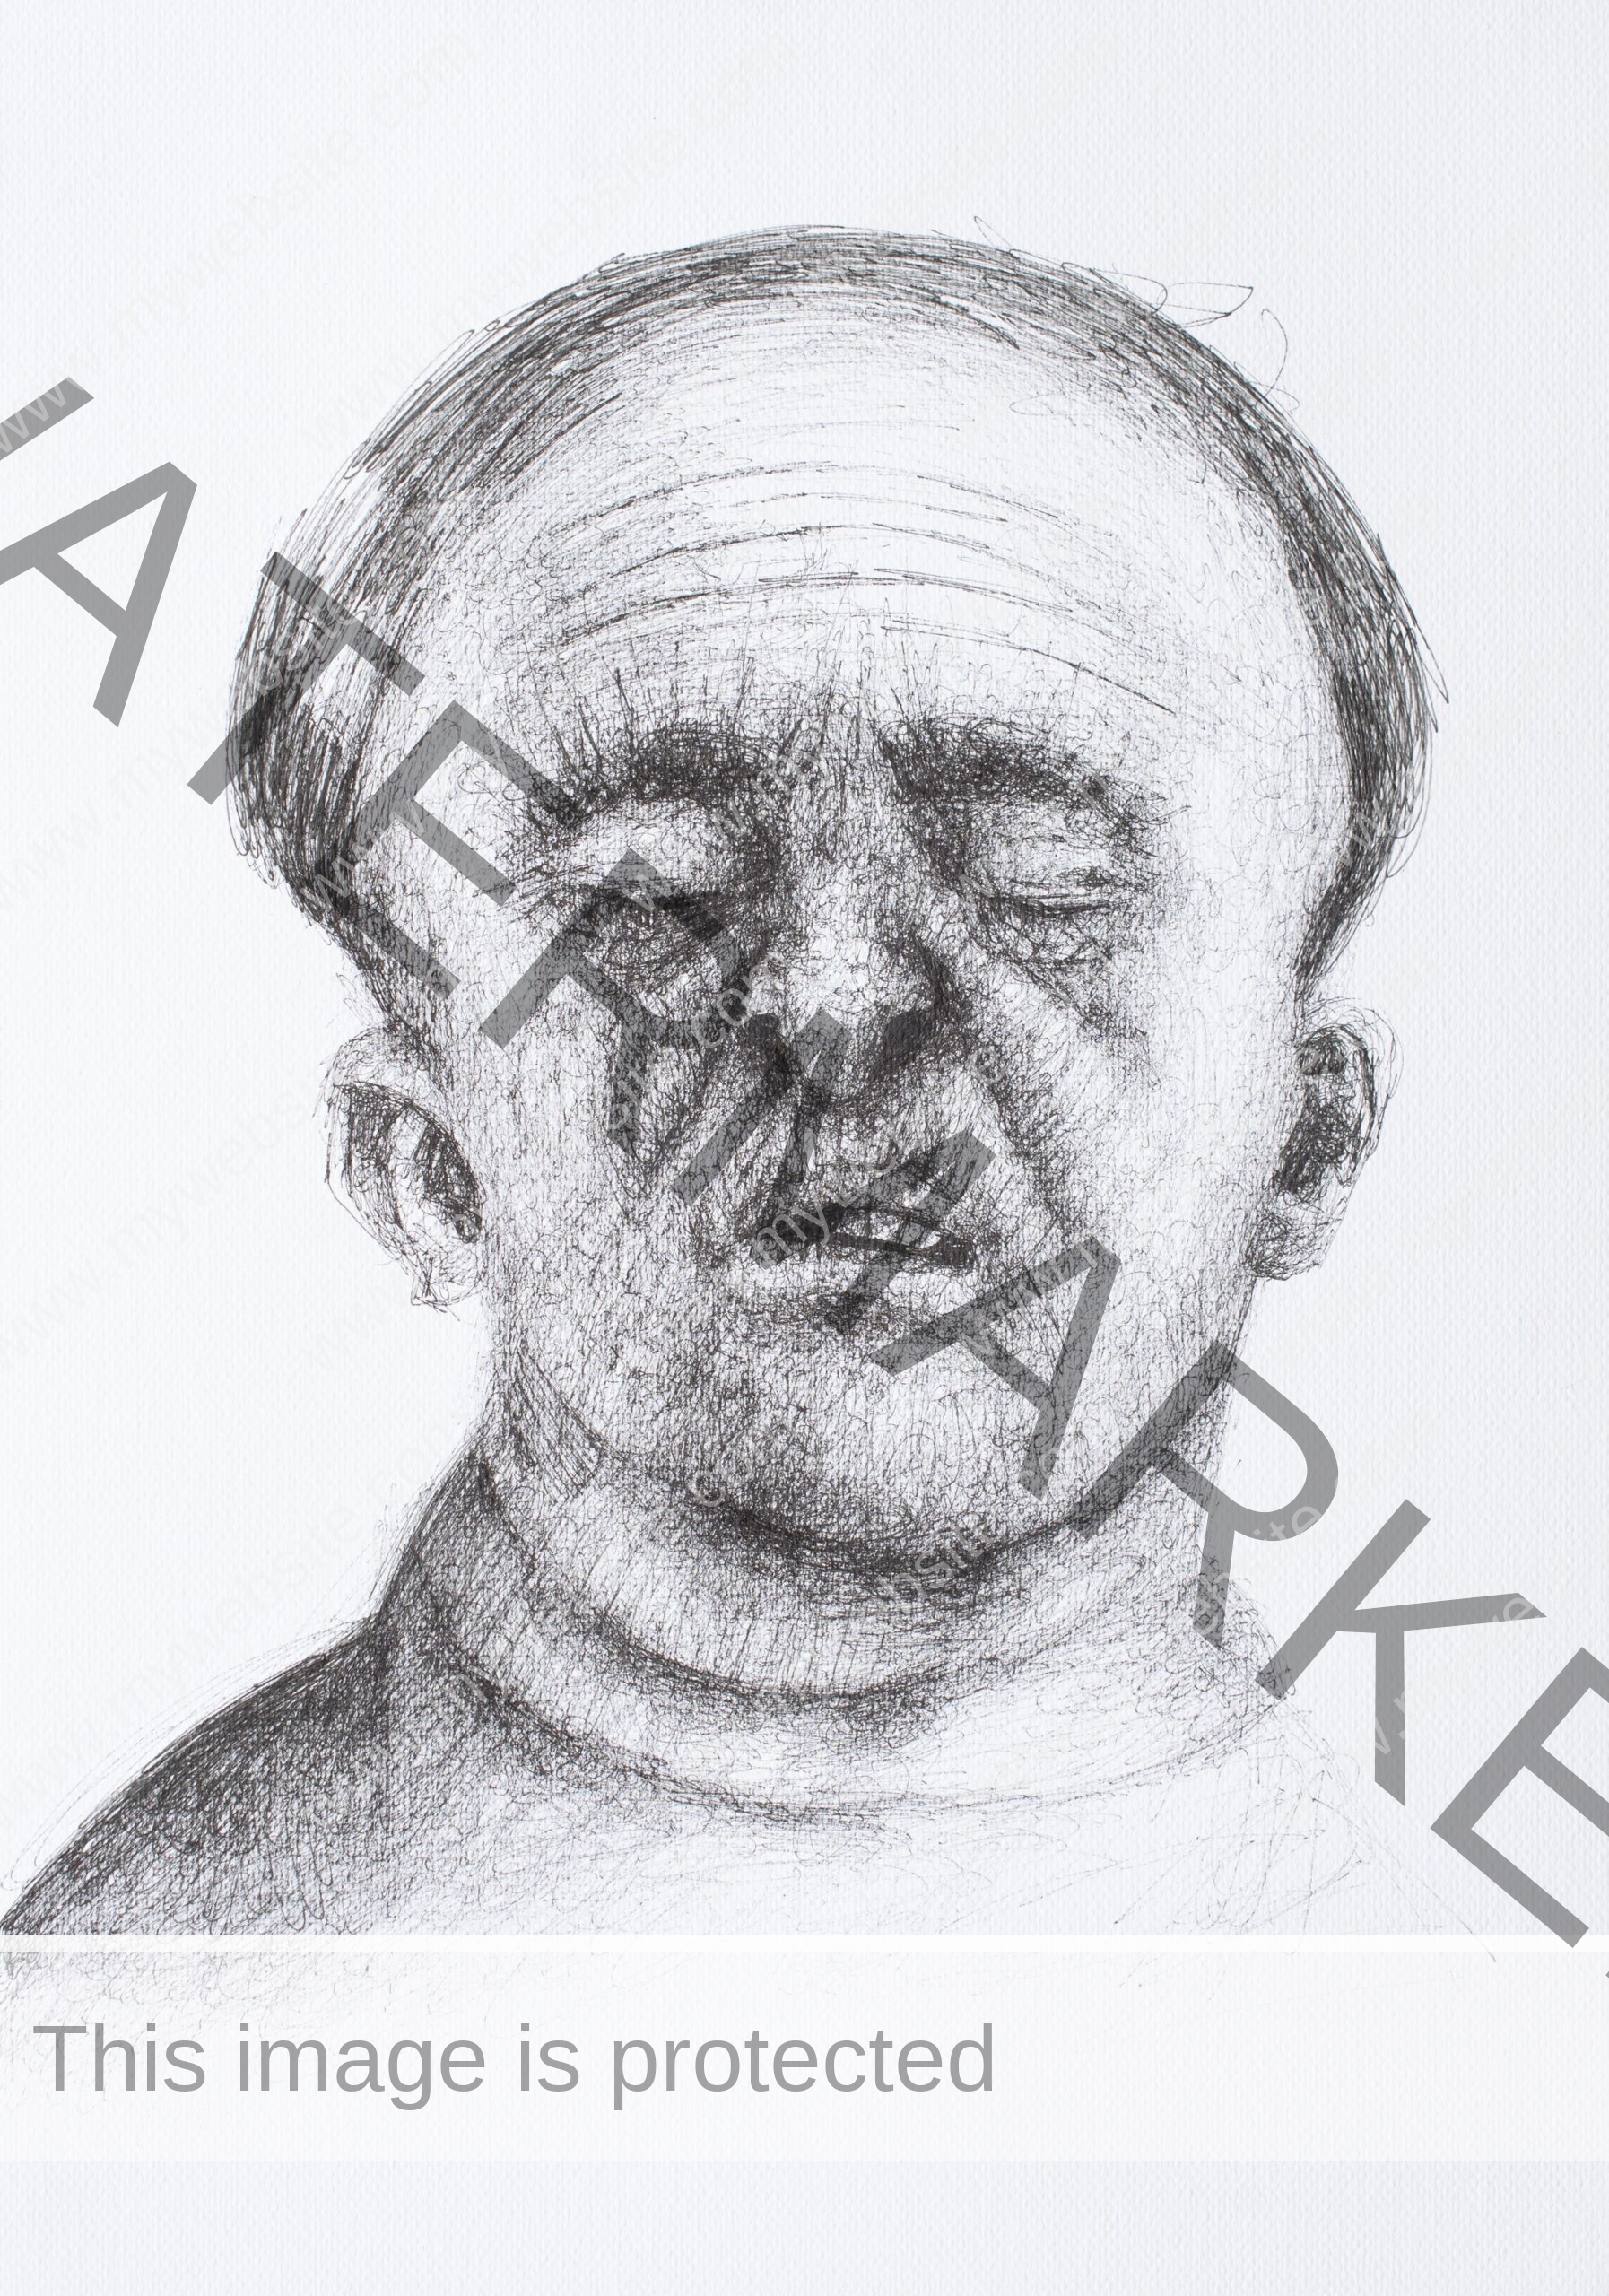 Figurative ink on paper artwork by Pablo Mejias, featuring a drawing of Baudelaire, with his eyes shut, evoking a death mask. The piece is unsettling and eerie.